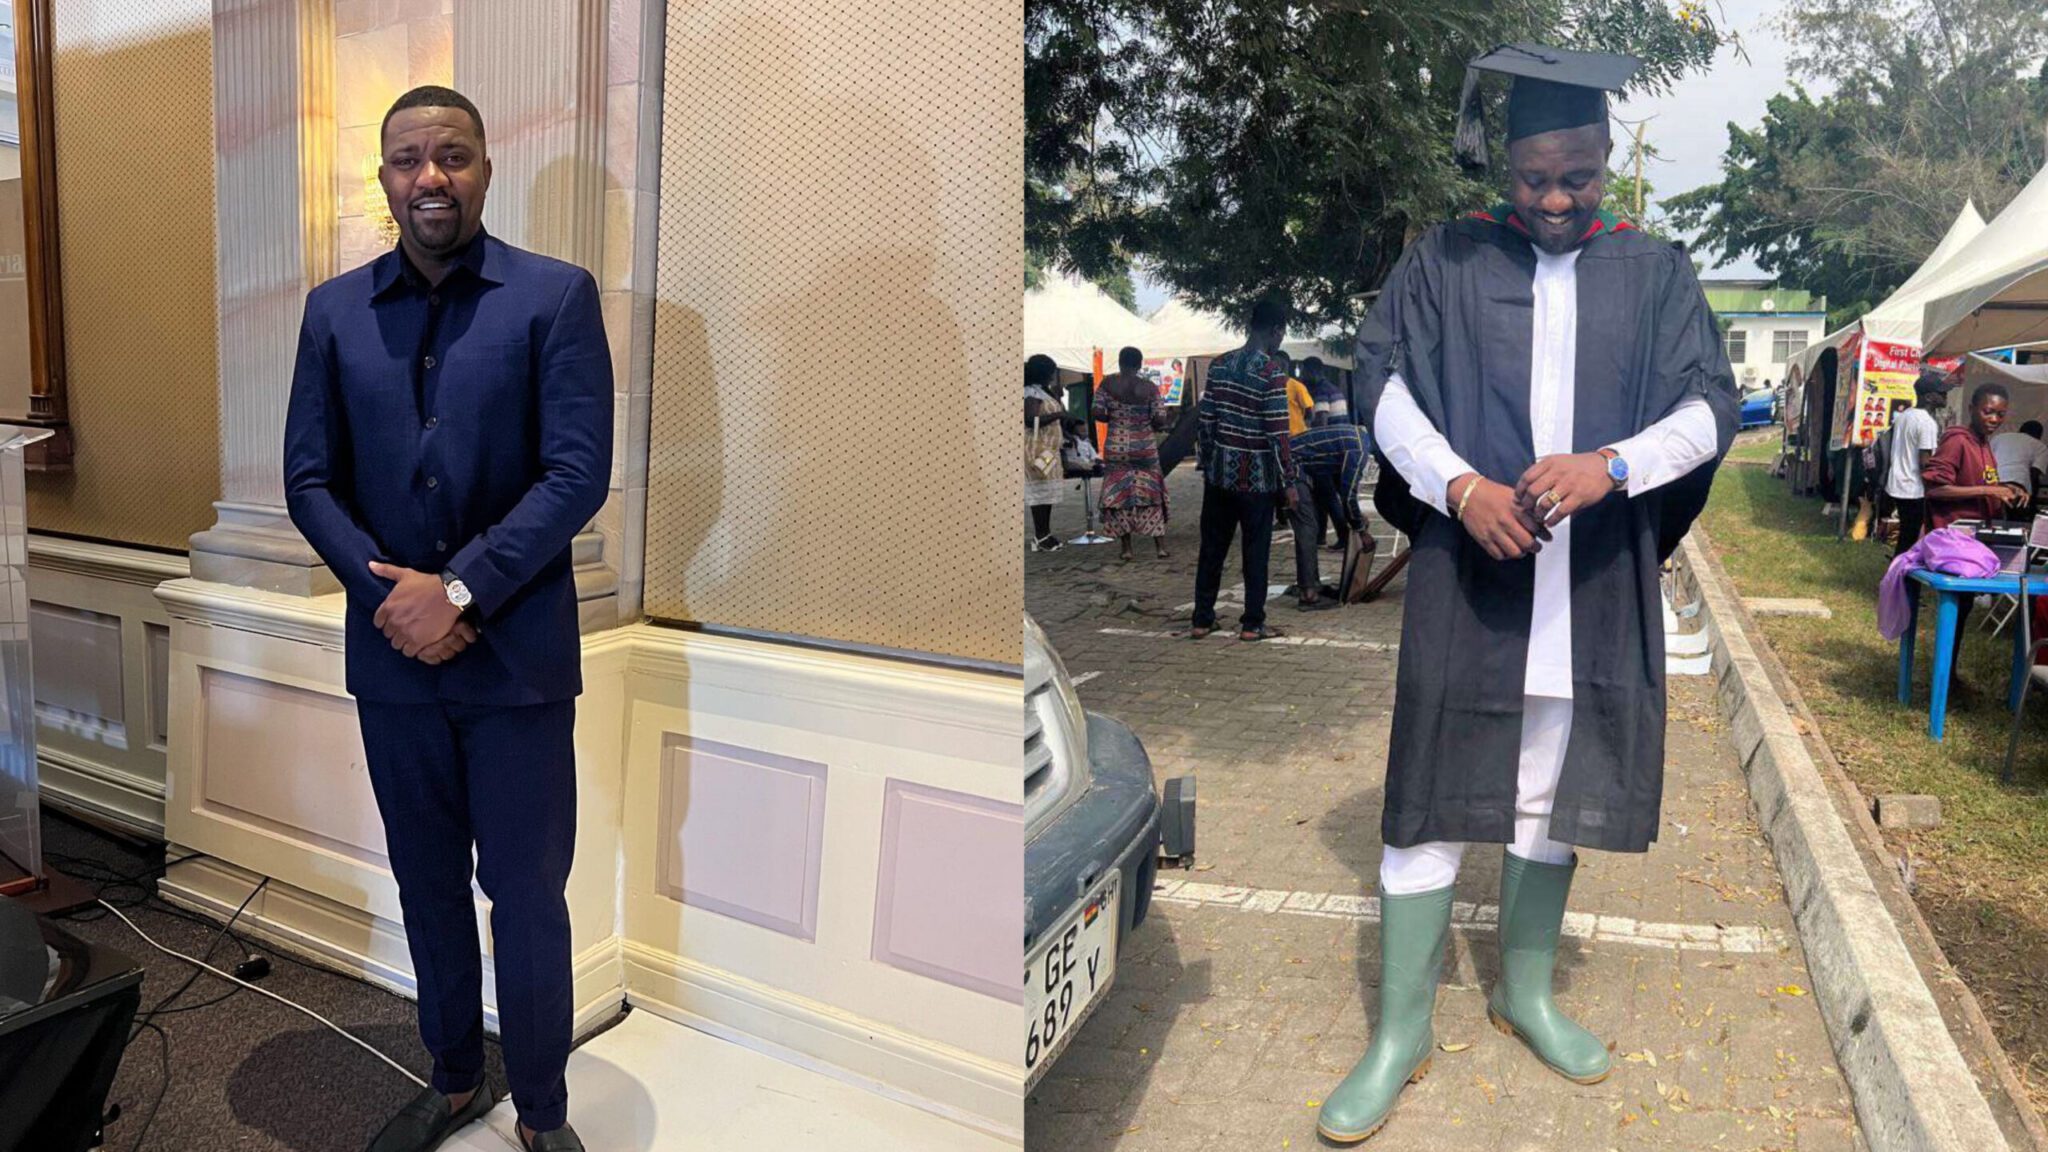 John Dumelo Adds Another Master's Degree To His List Of Academic Qualifications